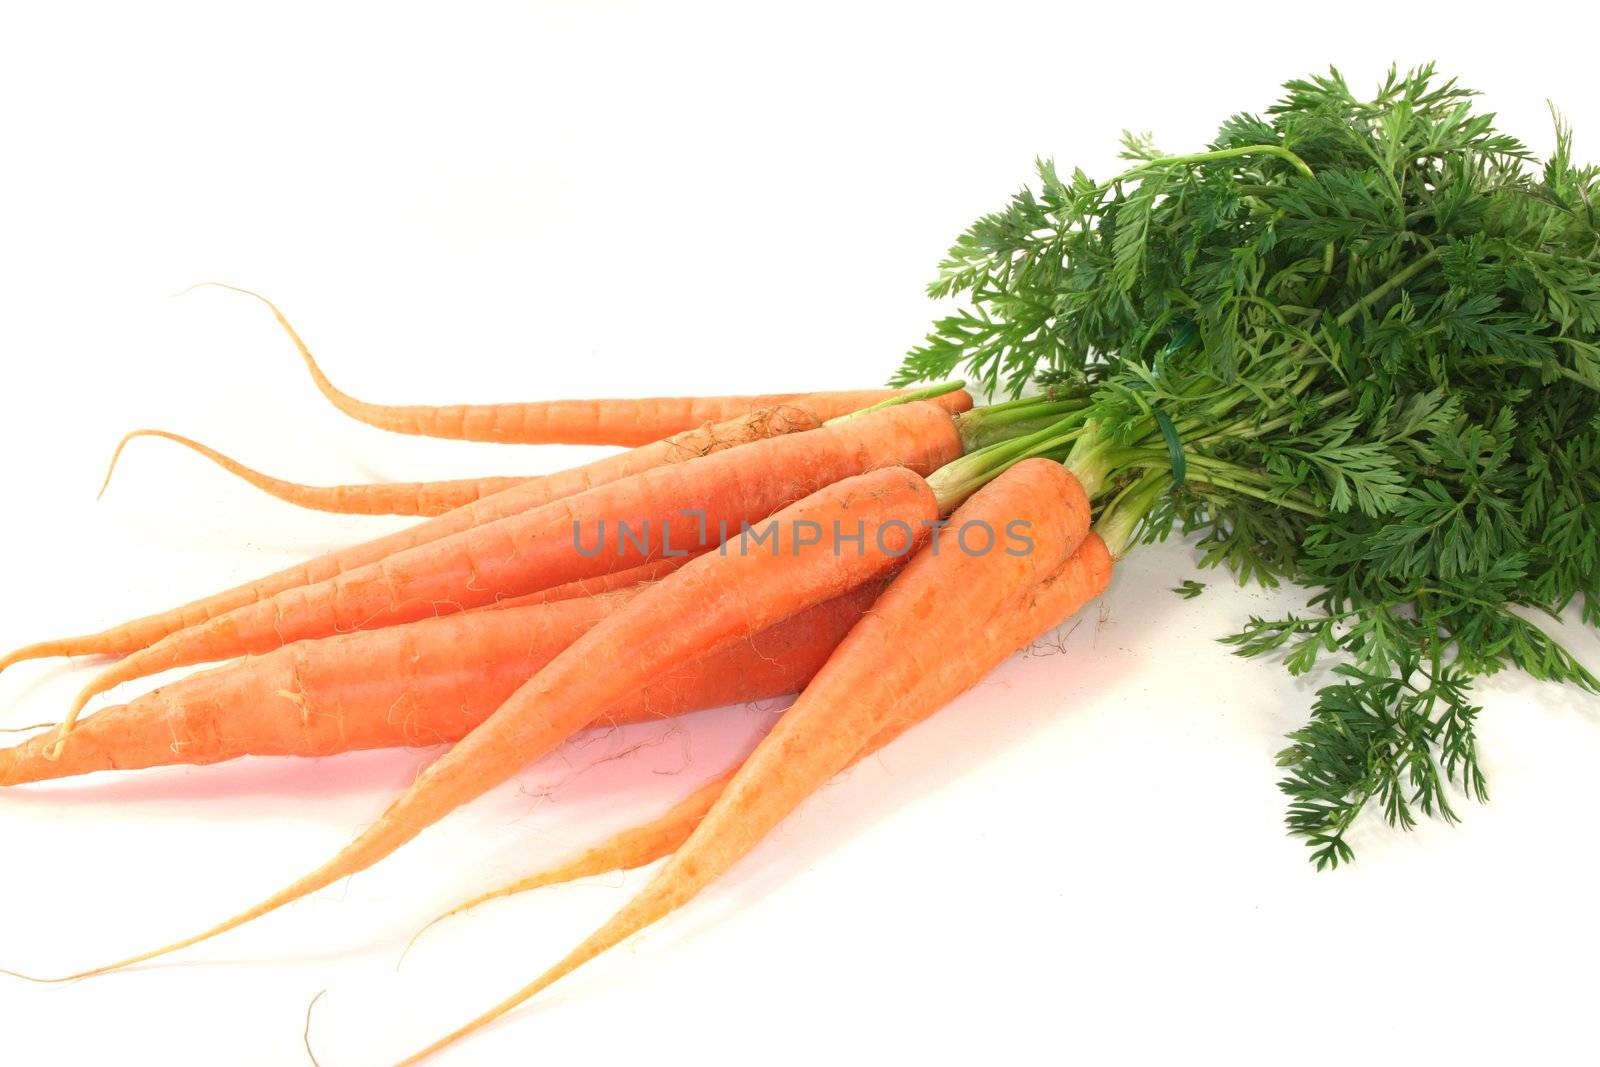 Carrots by discovery